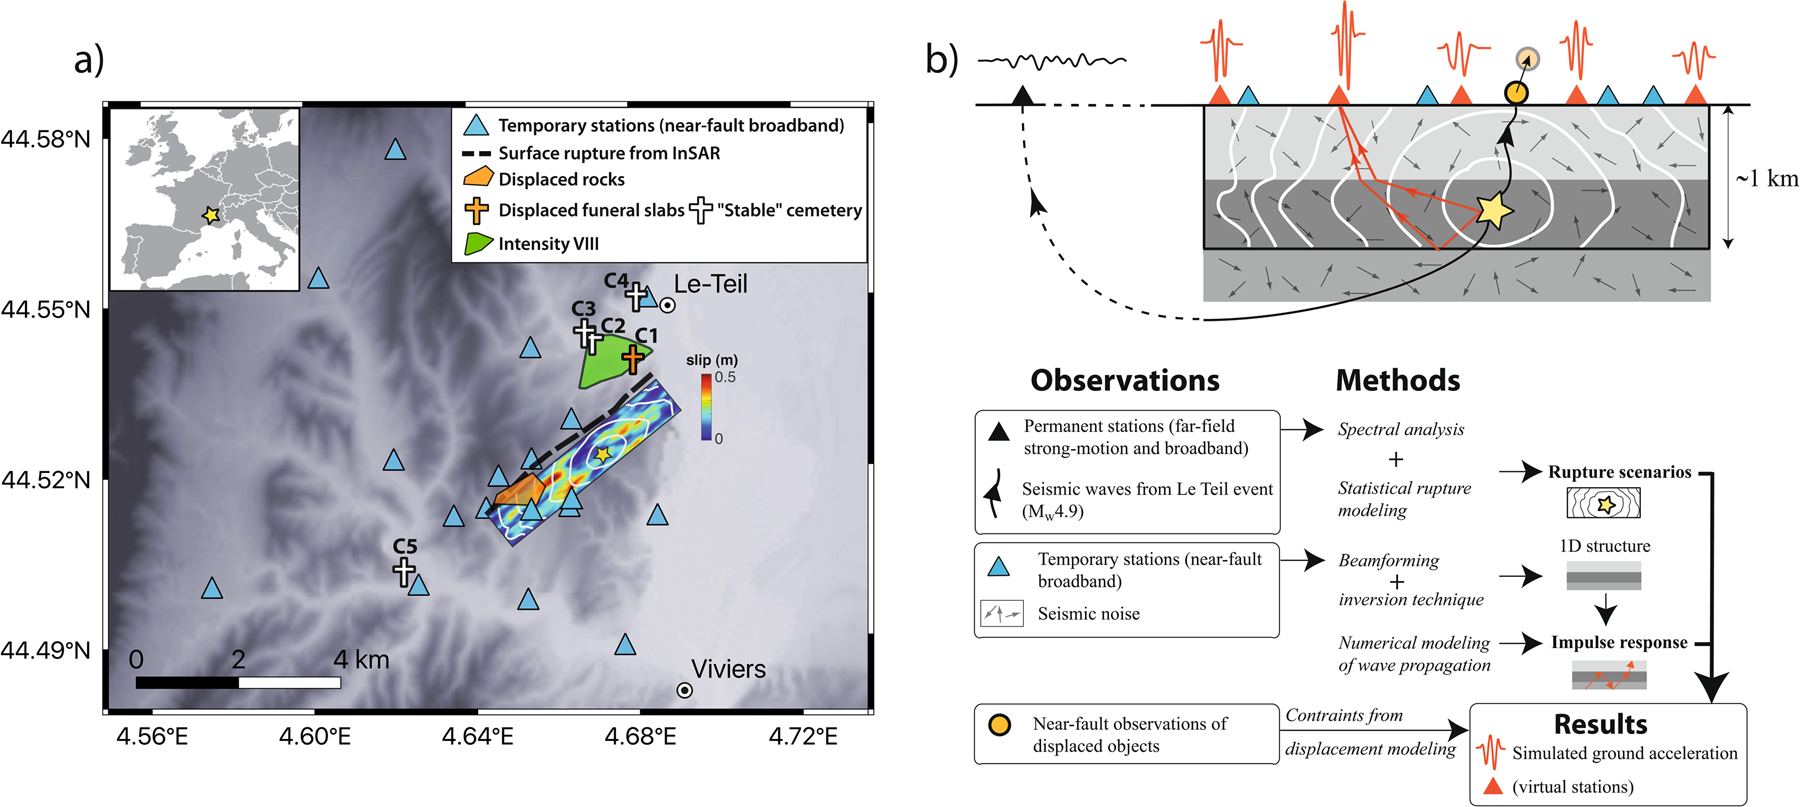 Exceptional ground motion during the shallow Mw 4.9 2019 Le Teil  earthquake, France | Communications Earth & Environment